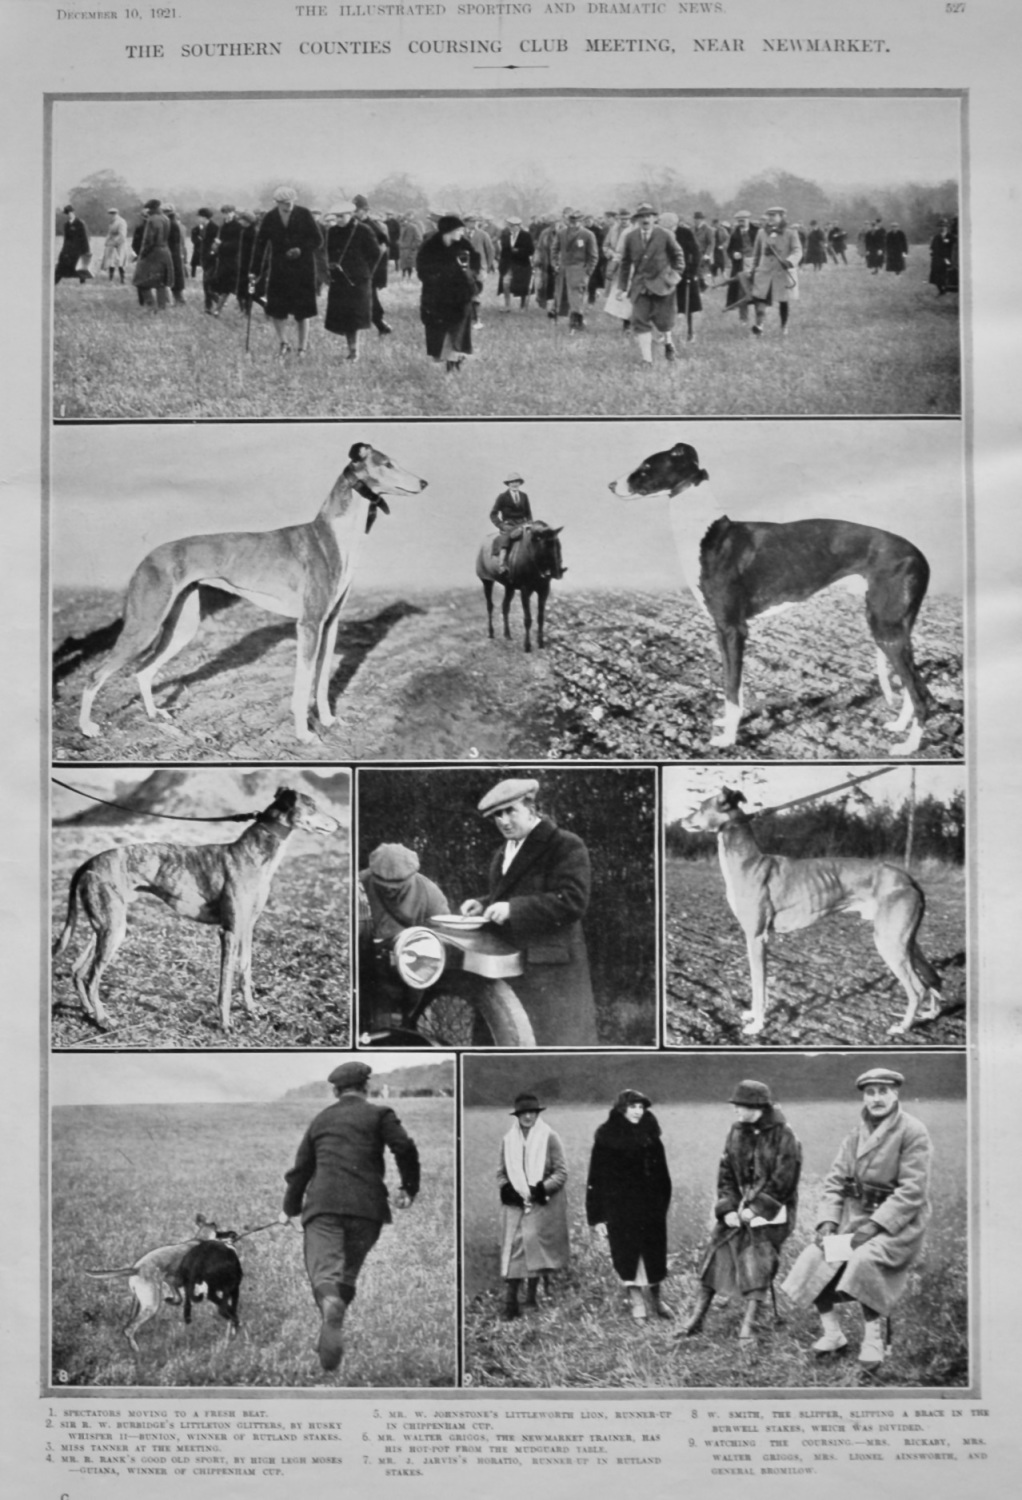 The Southern Counties Coursing Club Meeting, near Newmarket.  1921.